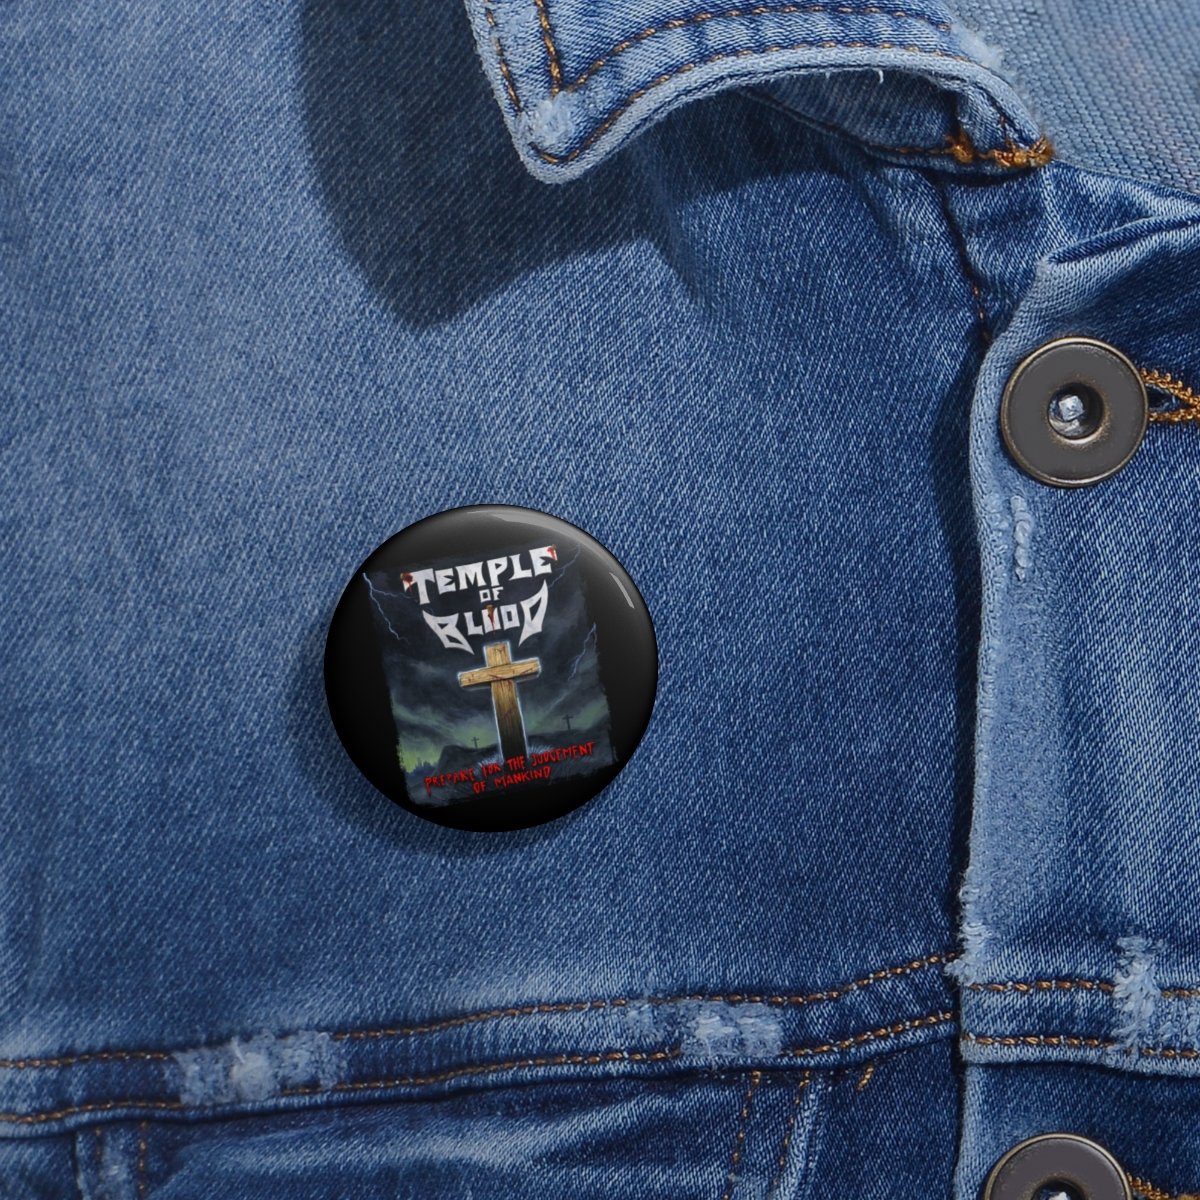 Temple of Blood – Prepare for the Judgment of Mankind Pin Buttons